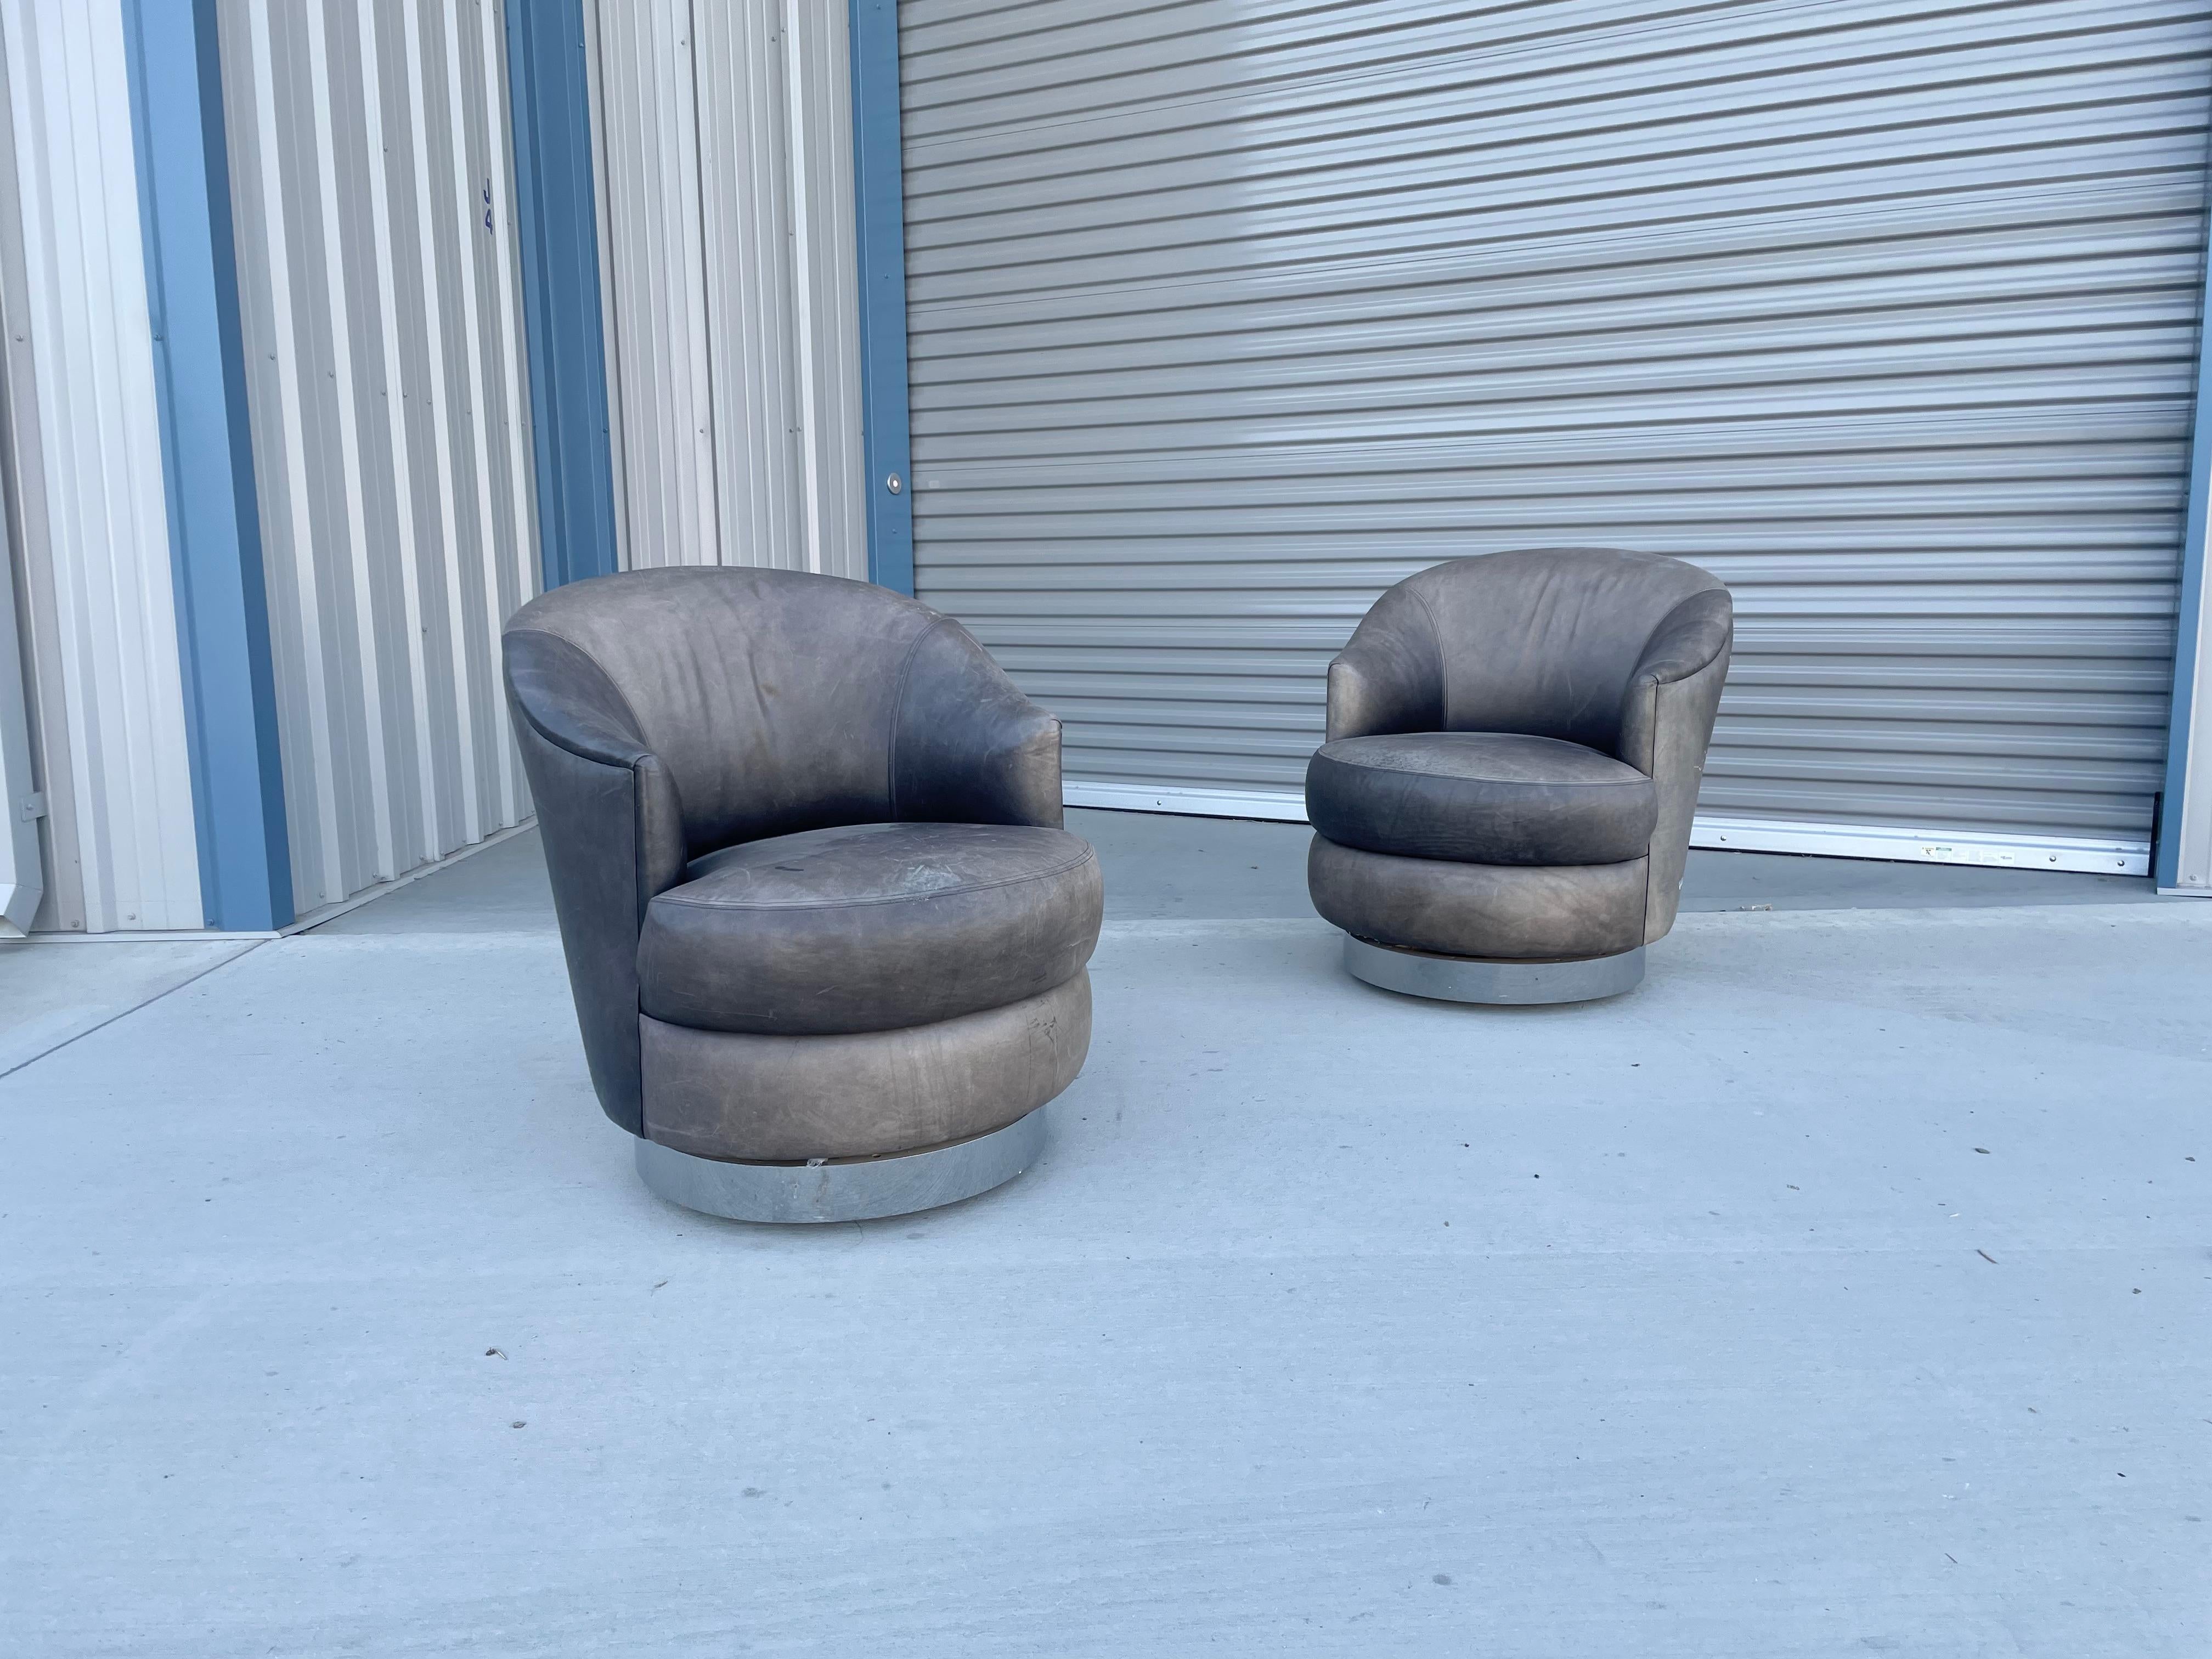 Beautiful pair of vintage leather chrome swivel chairs designed by Sally Sirkin Lewis for J Robert Scott & Associates in the United States, circa 1980s. These chairs are covered in leather upholstery on top of a chrome swivel base that rotates 360